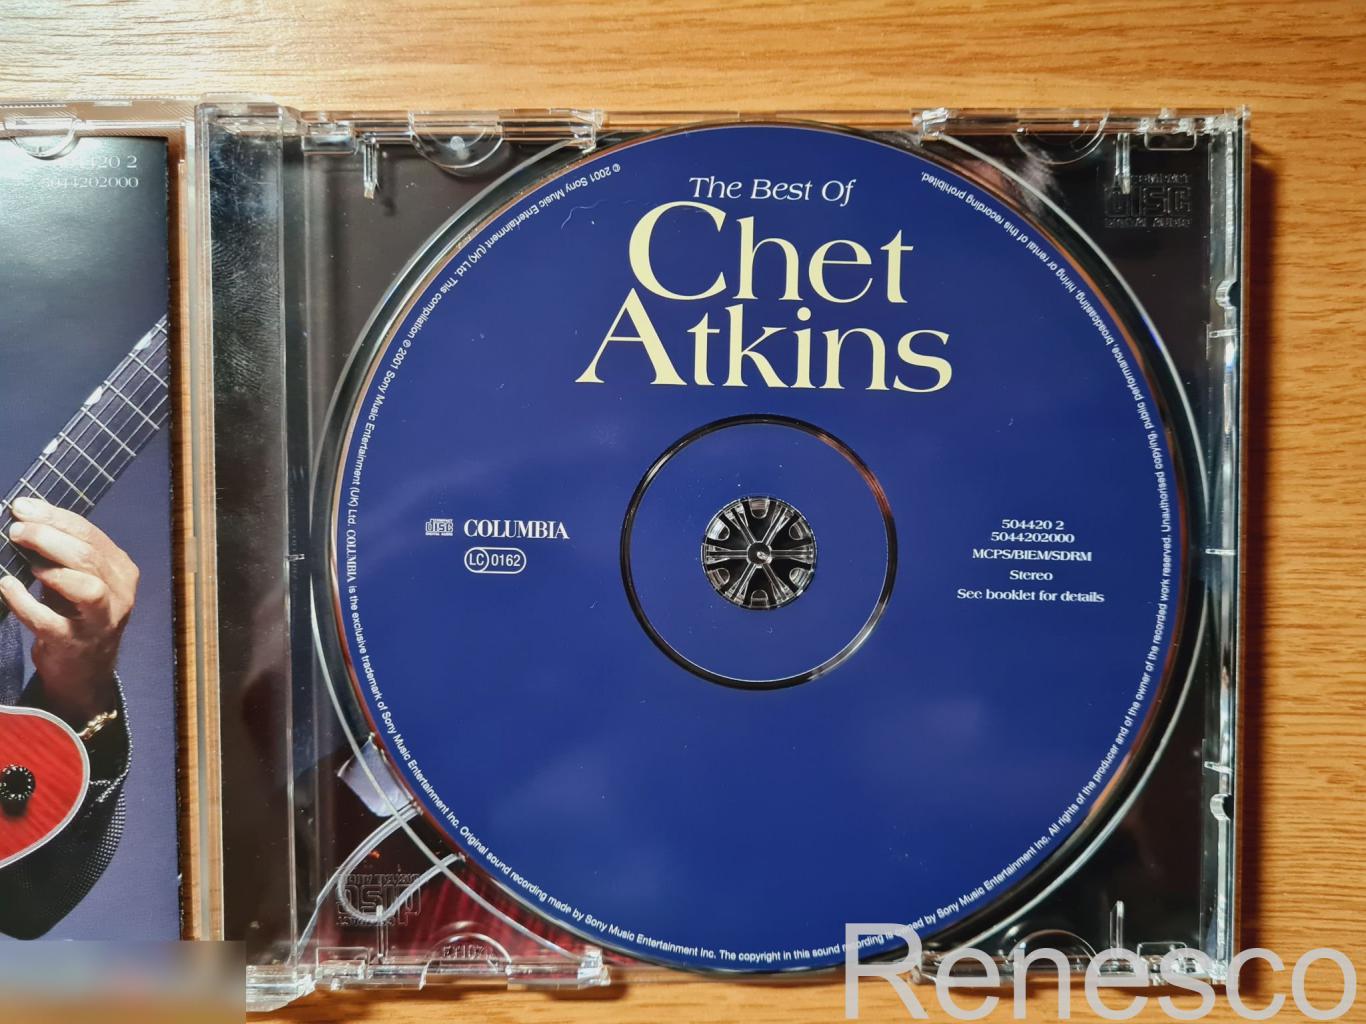 Chet Atkins ?– The Best Of Chet Atkins (Europe) (2001) 4